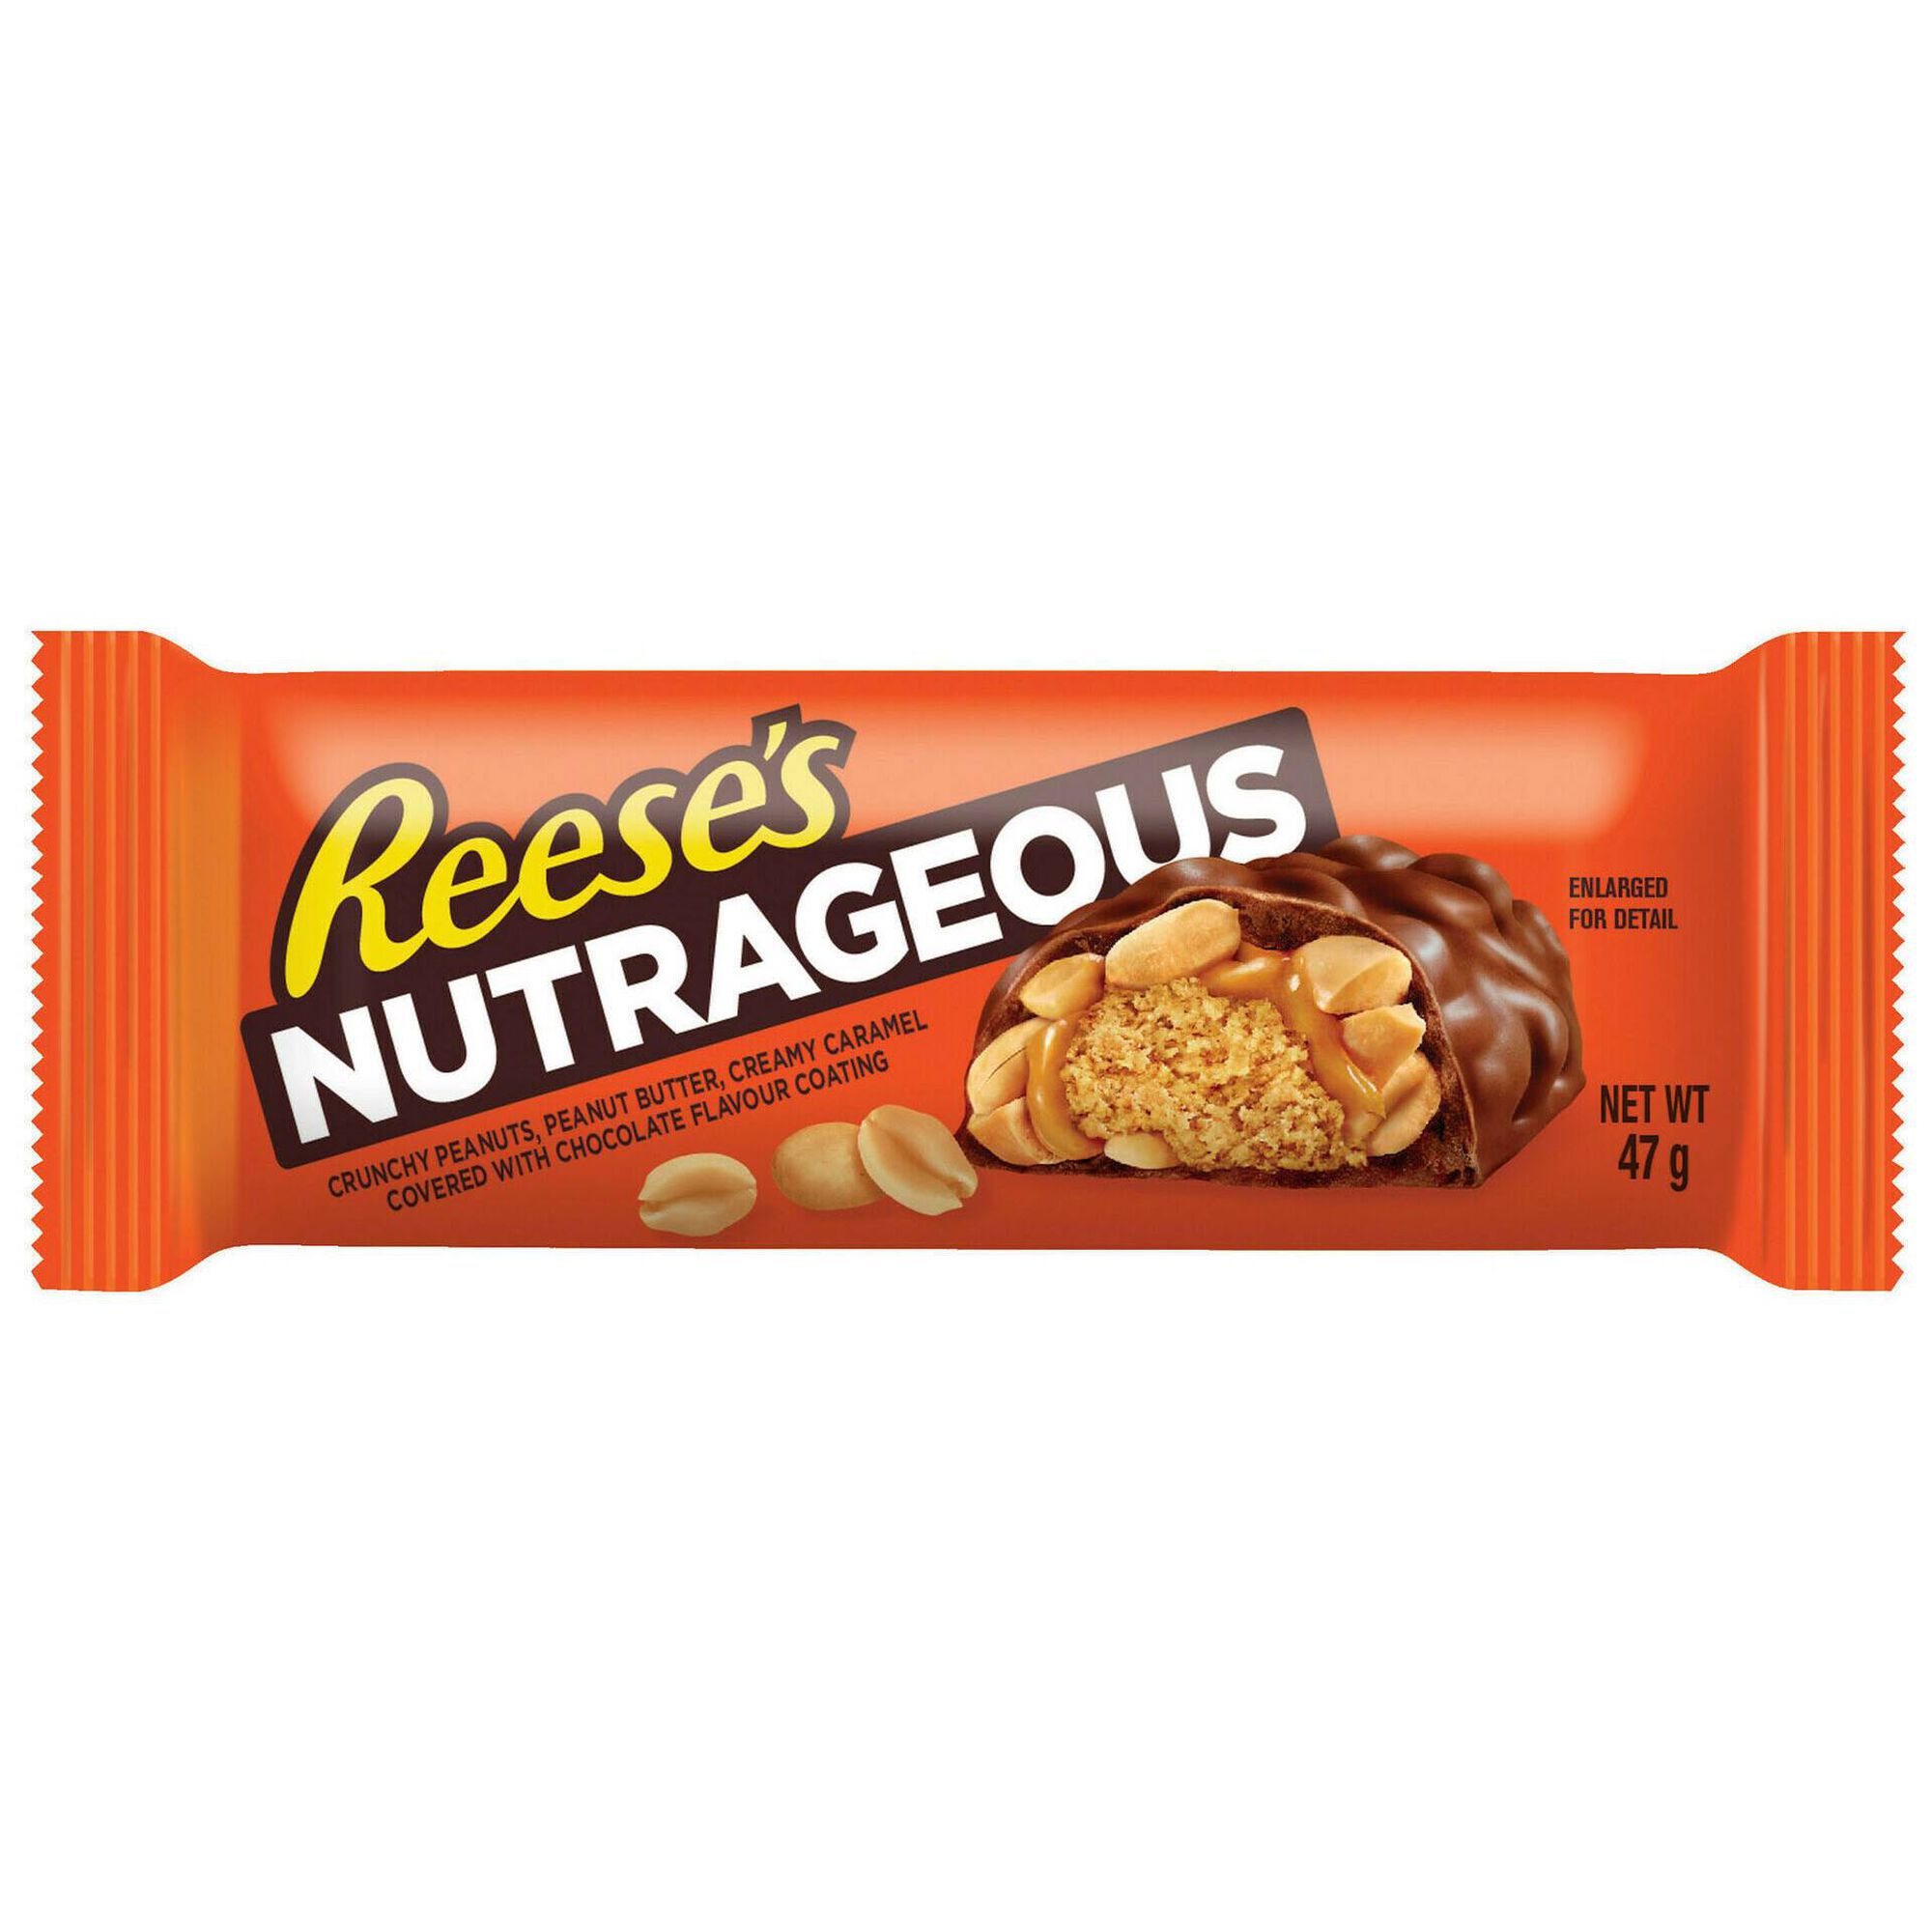 Chocolate Nutrageous